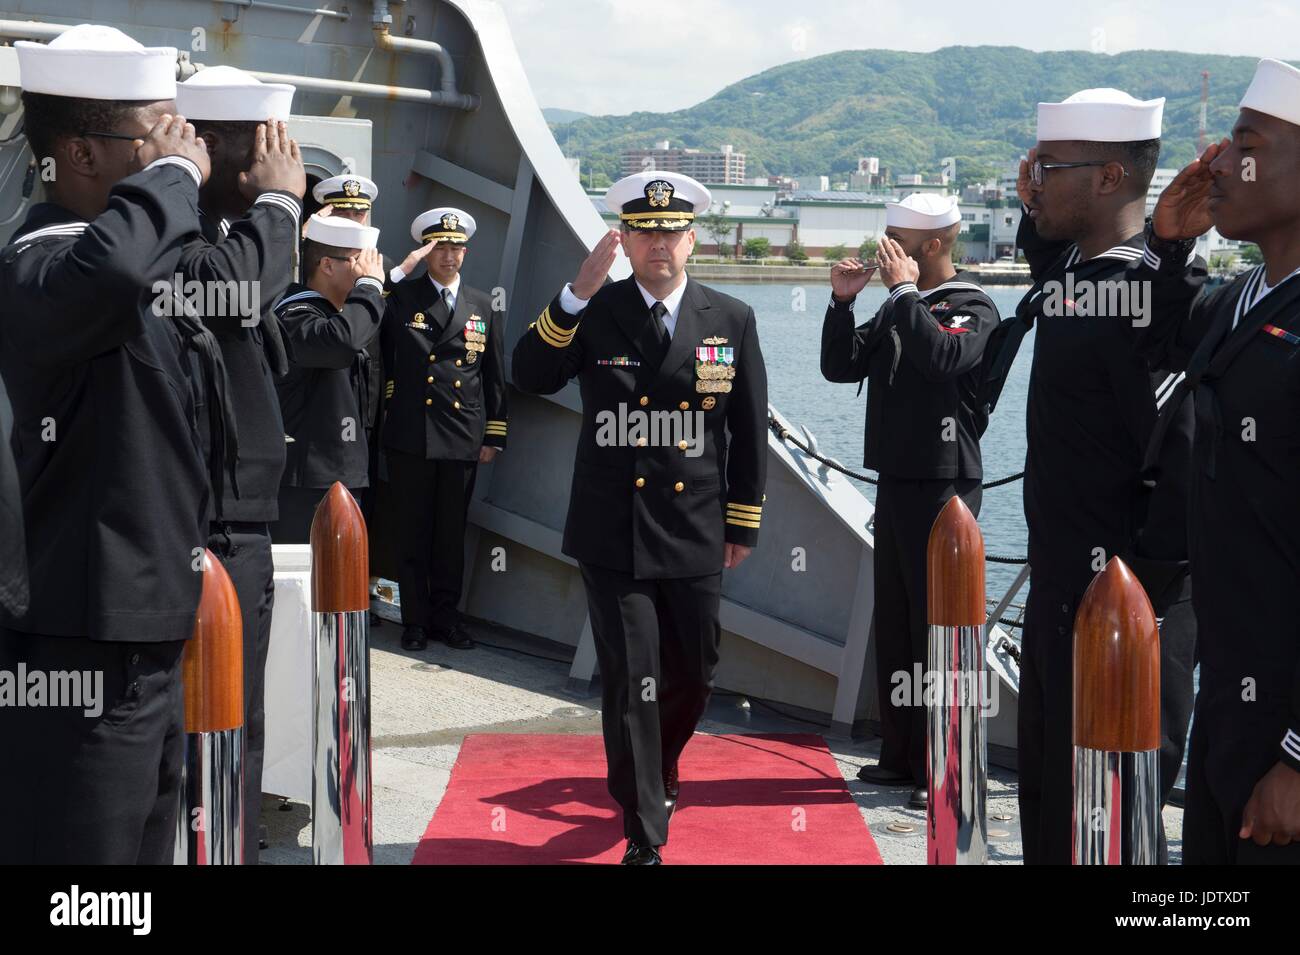 U.S Navy Cmdr. Bryce Benson, center, is welcomed onboard during the change of command ceremony for the Arleigh Burke-class guided missile destroyer USS Fitzgerald May 13, 2017 in Yokosuka, Japan. Stock Photo